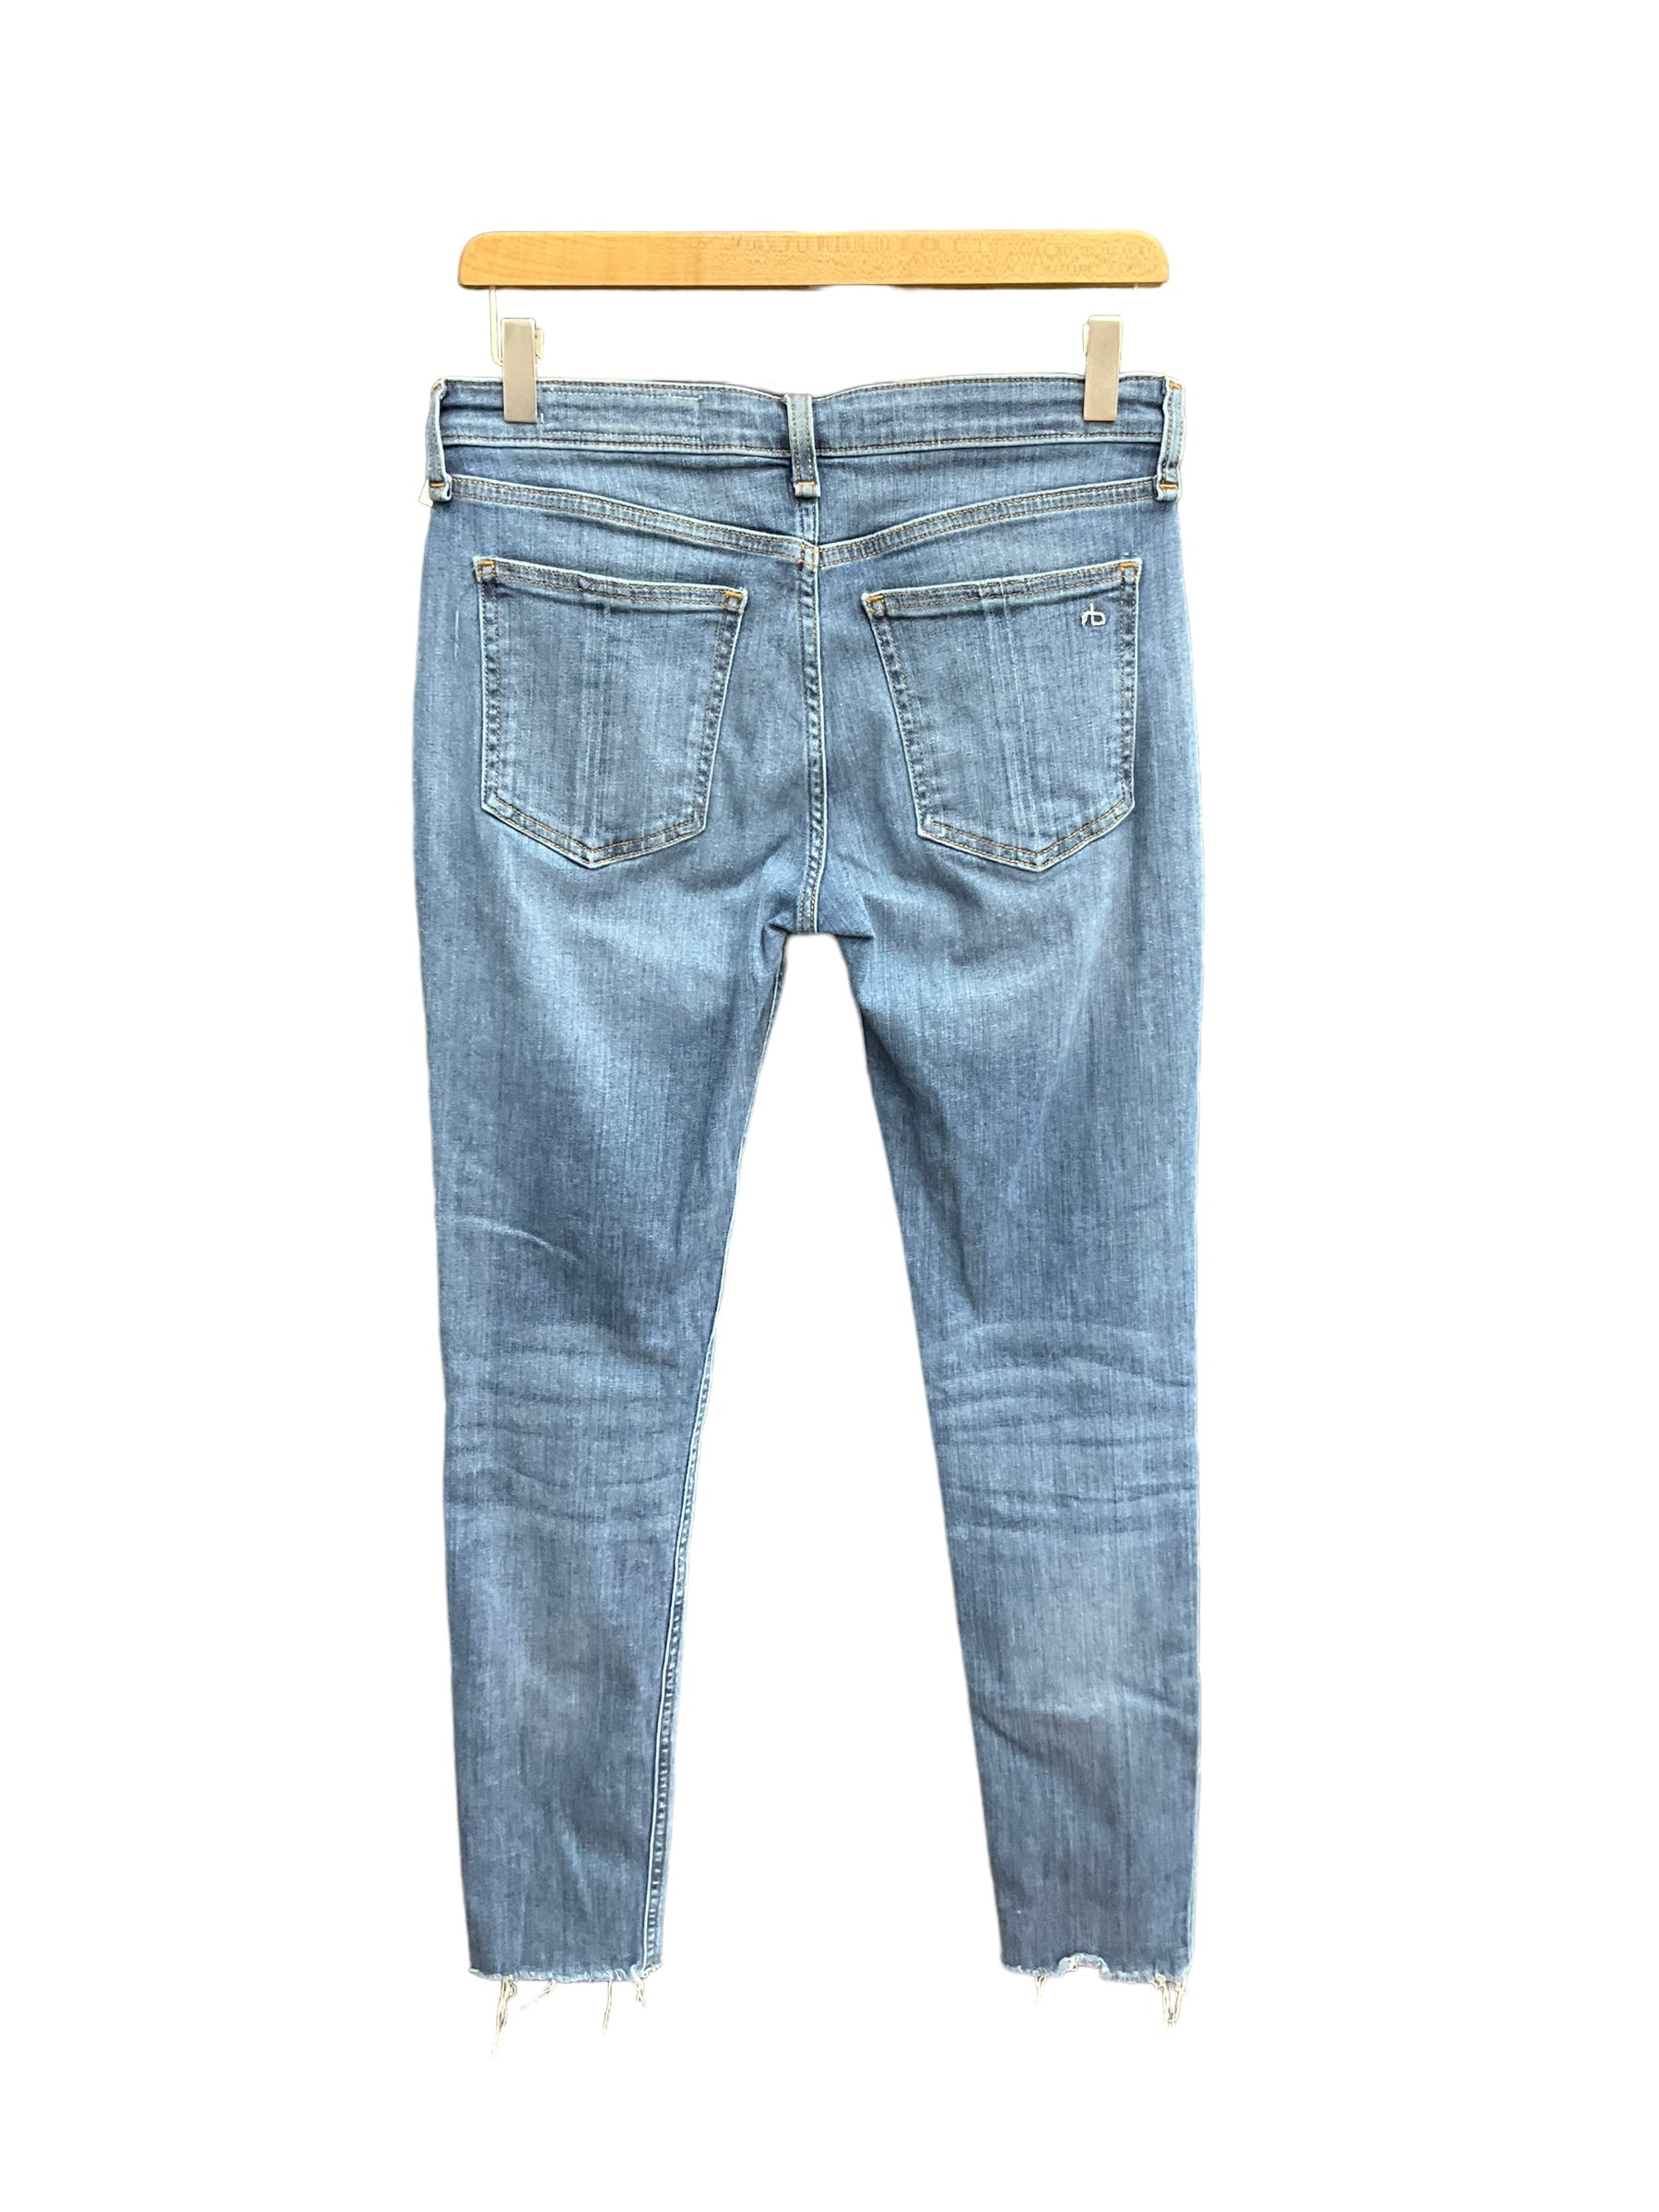 Jeans Skinny By Rag And Bone Size: 4 – Clothes Mentor